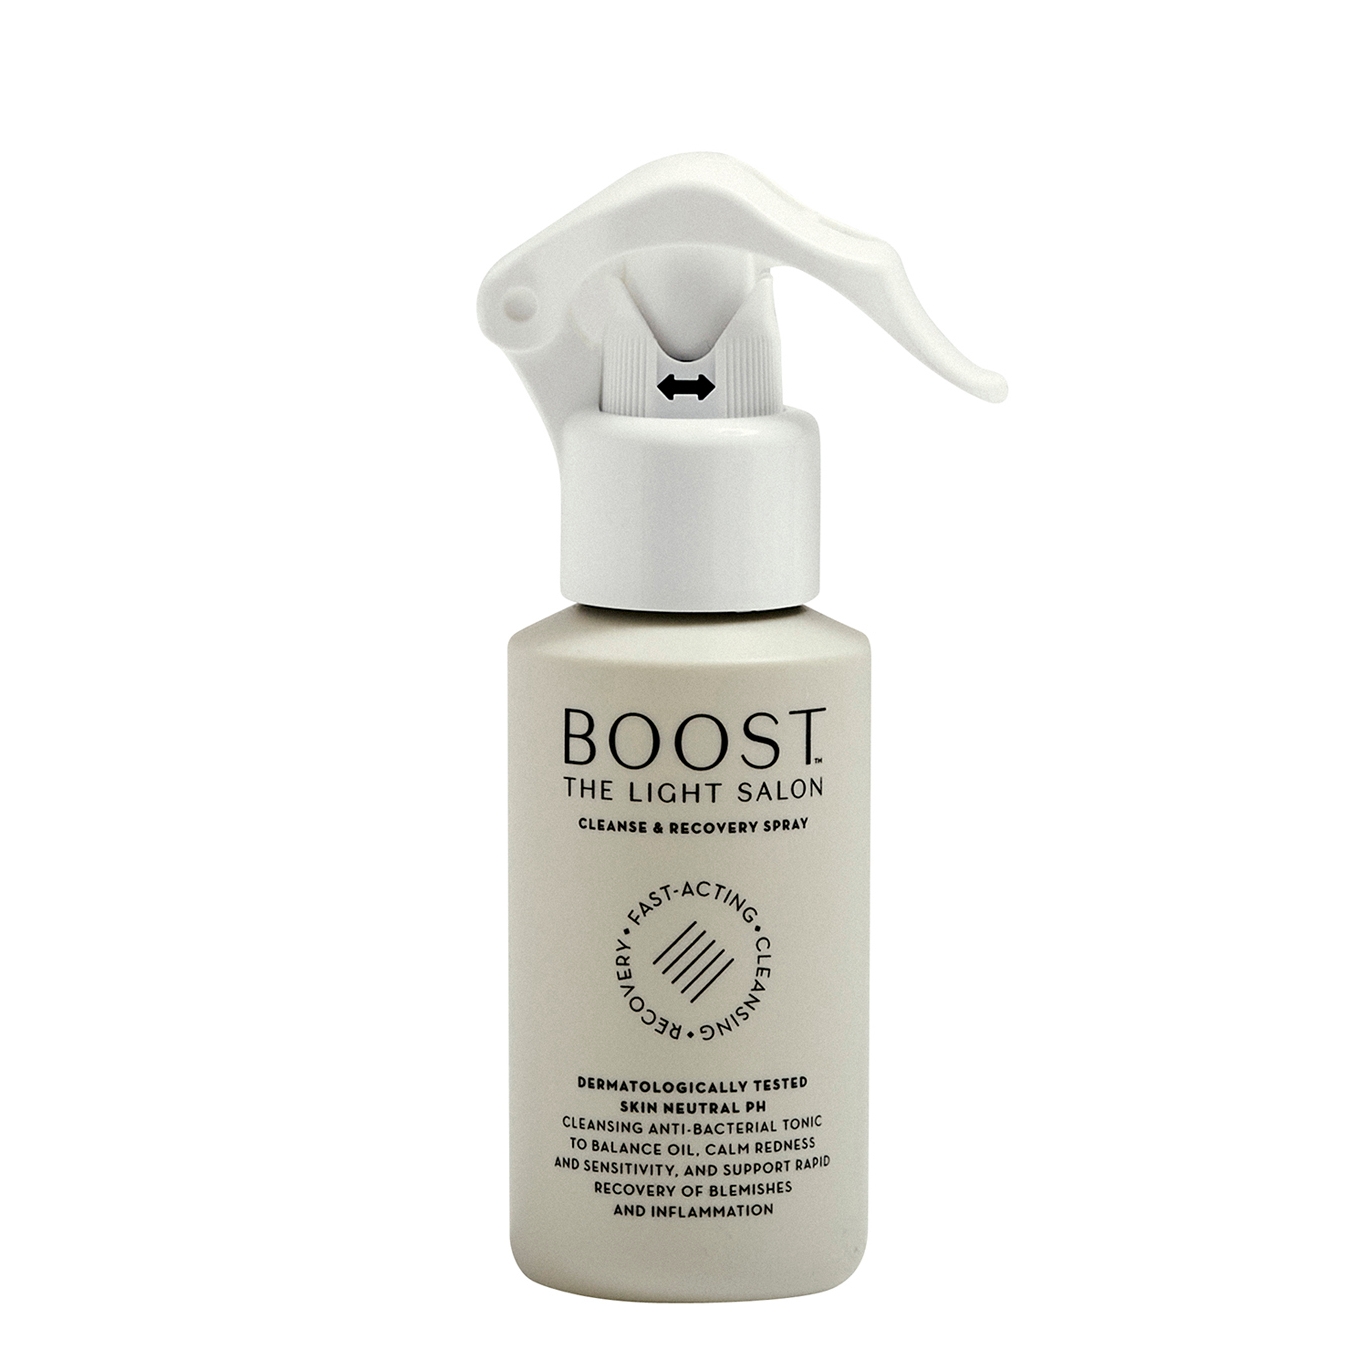 The Light Salon Boost Cleanse & Recovery Spray 100ml